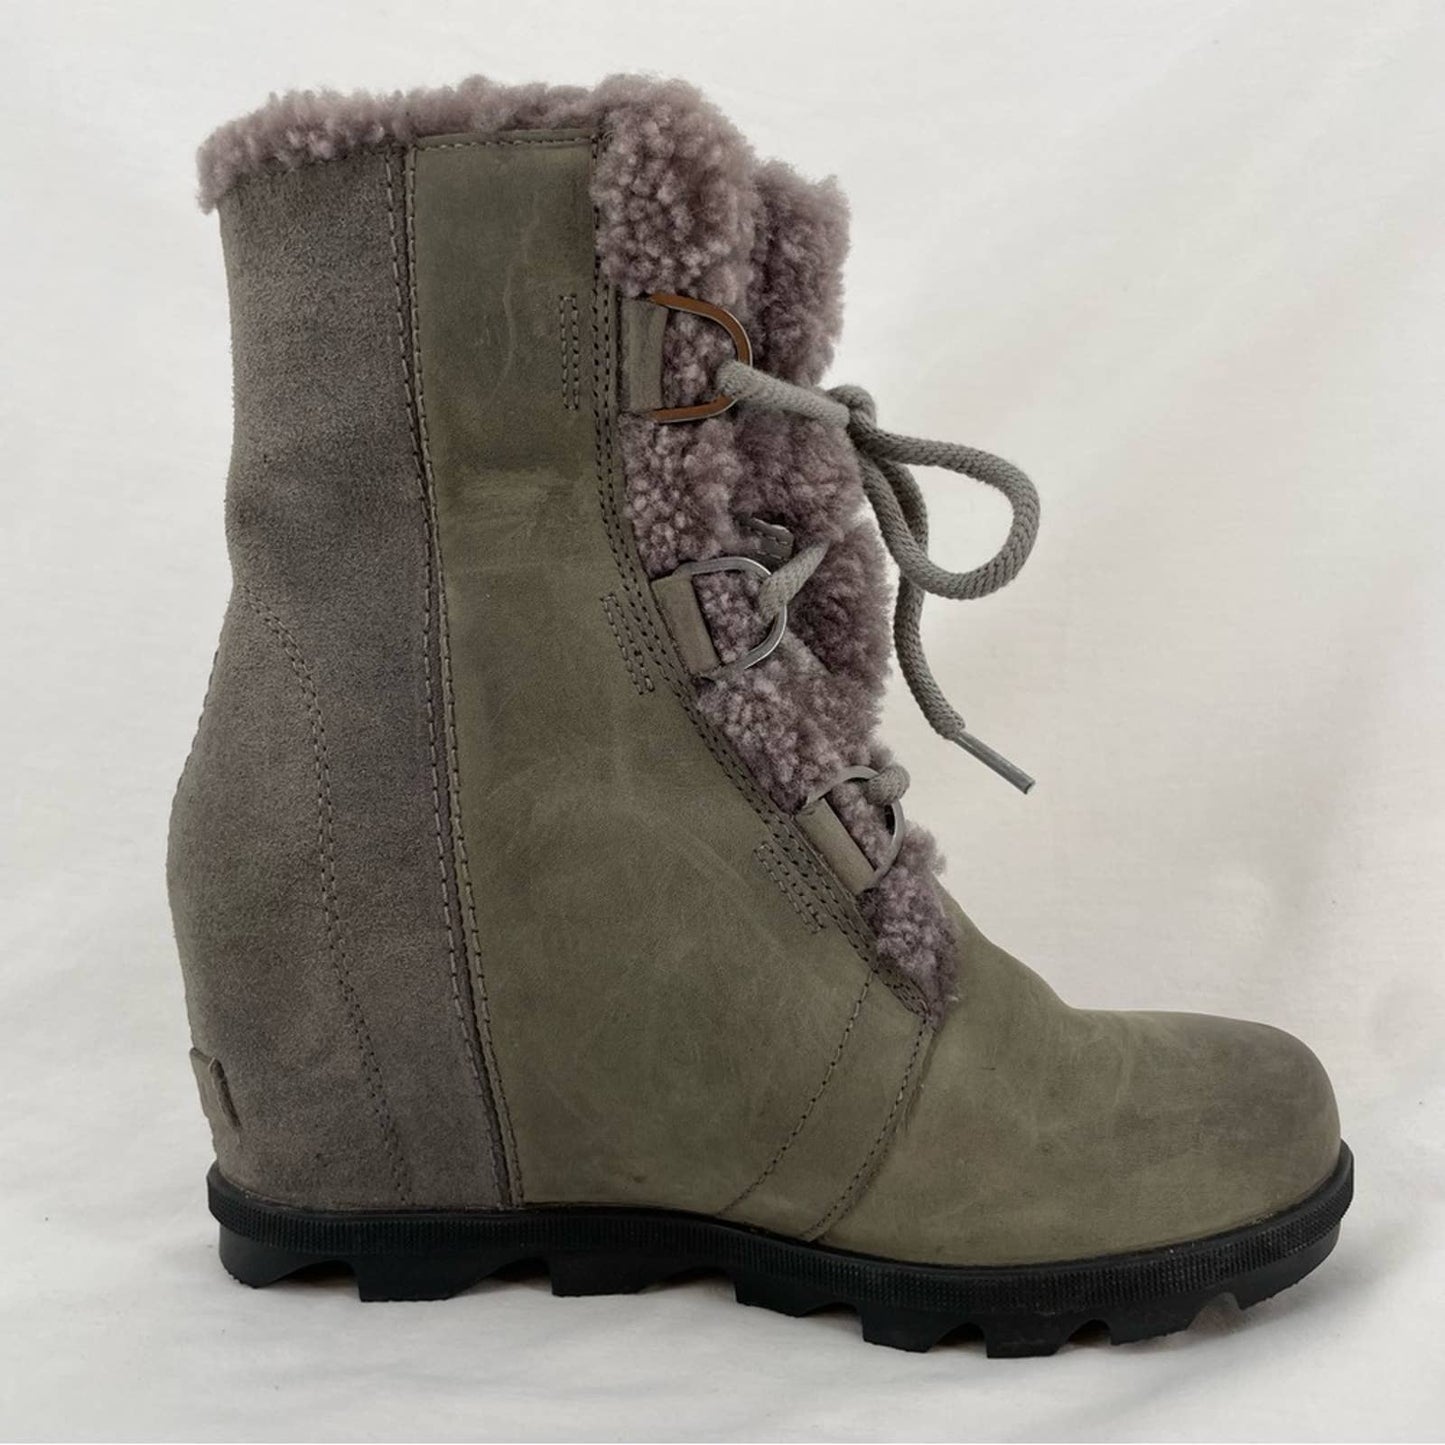 Sorel Joan of Arctic Wedge II Shearling Leather Boots Quarry Grey Greige Size 9.5